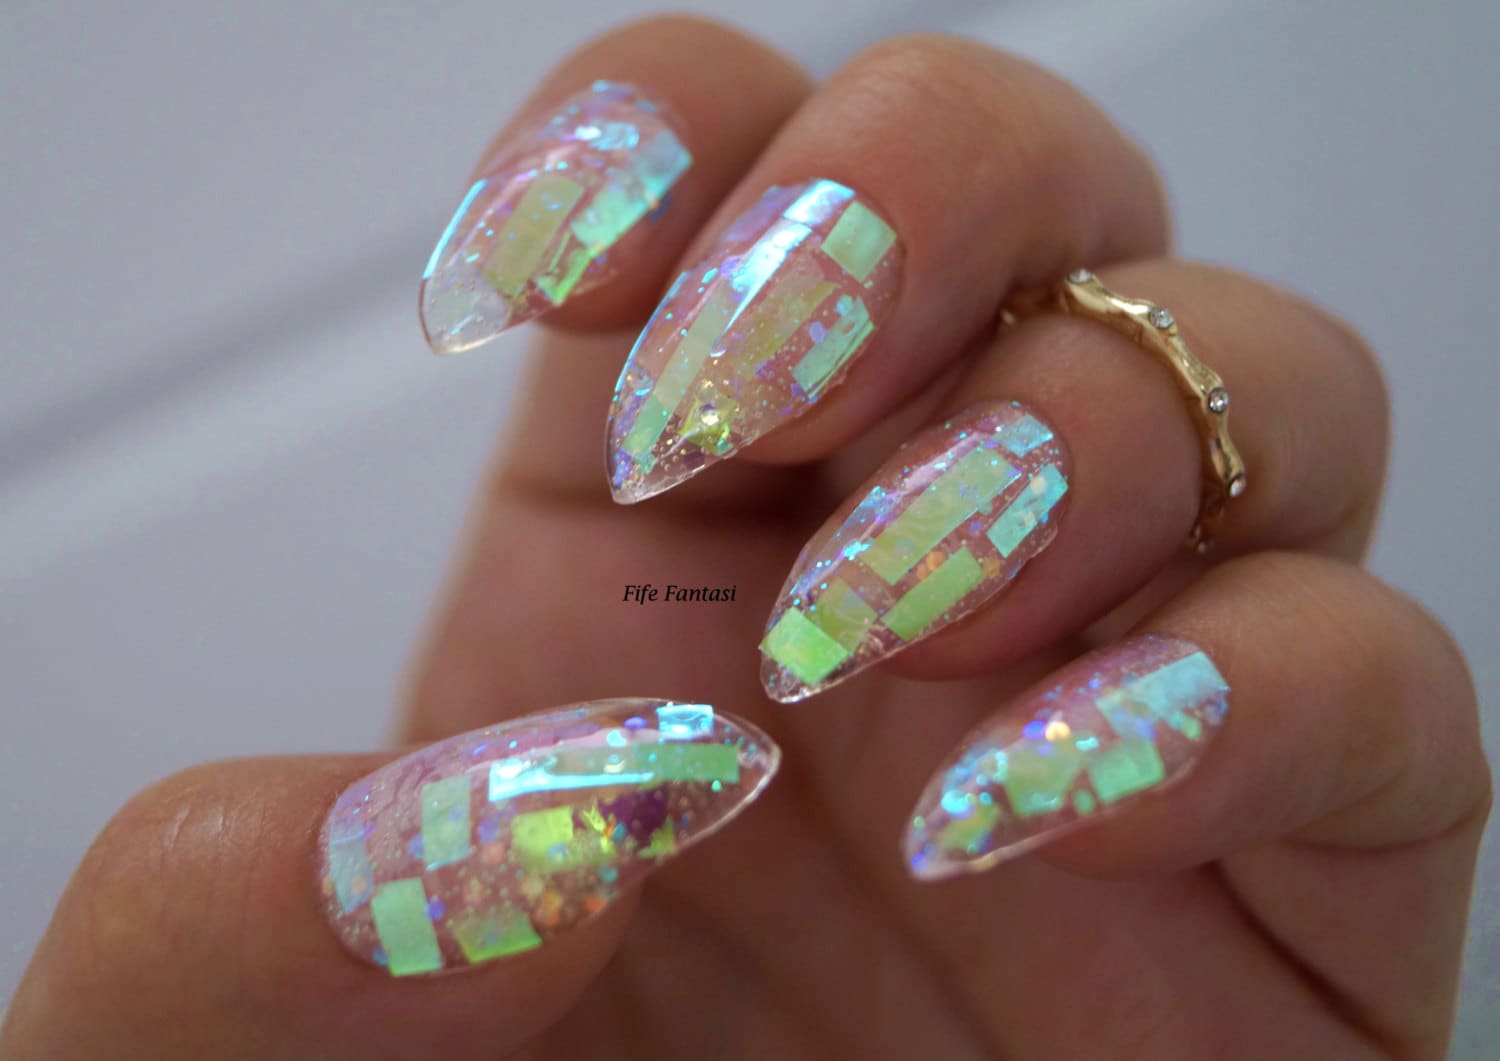 2. How to Create Glass Shard Nails - wide 4